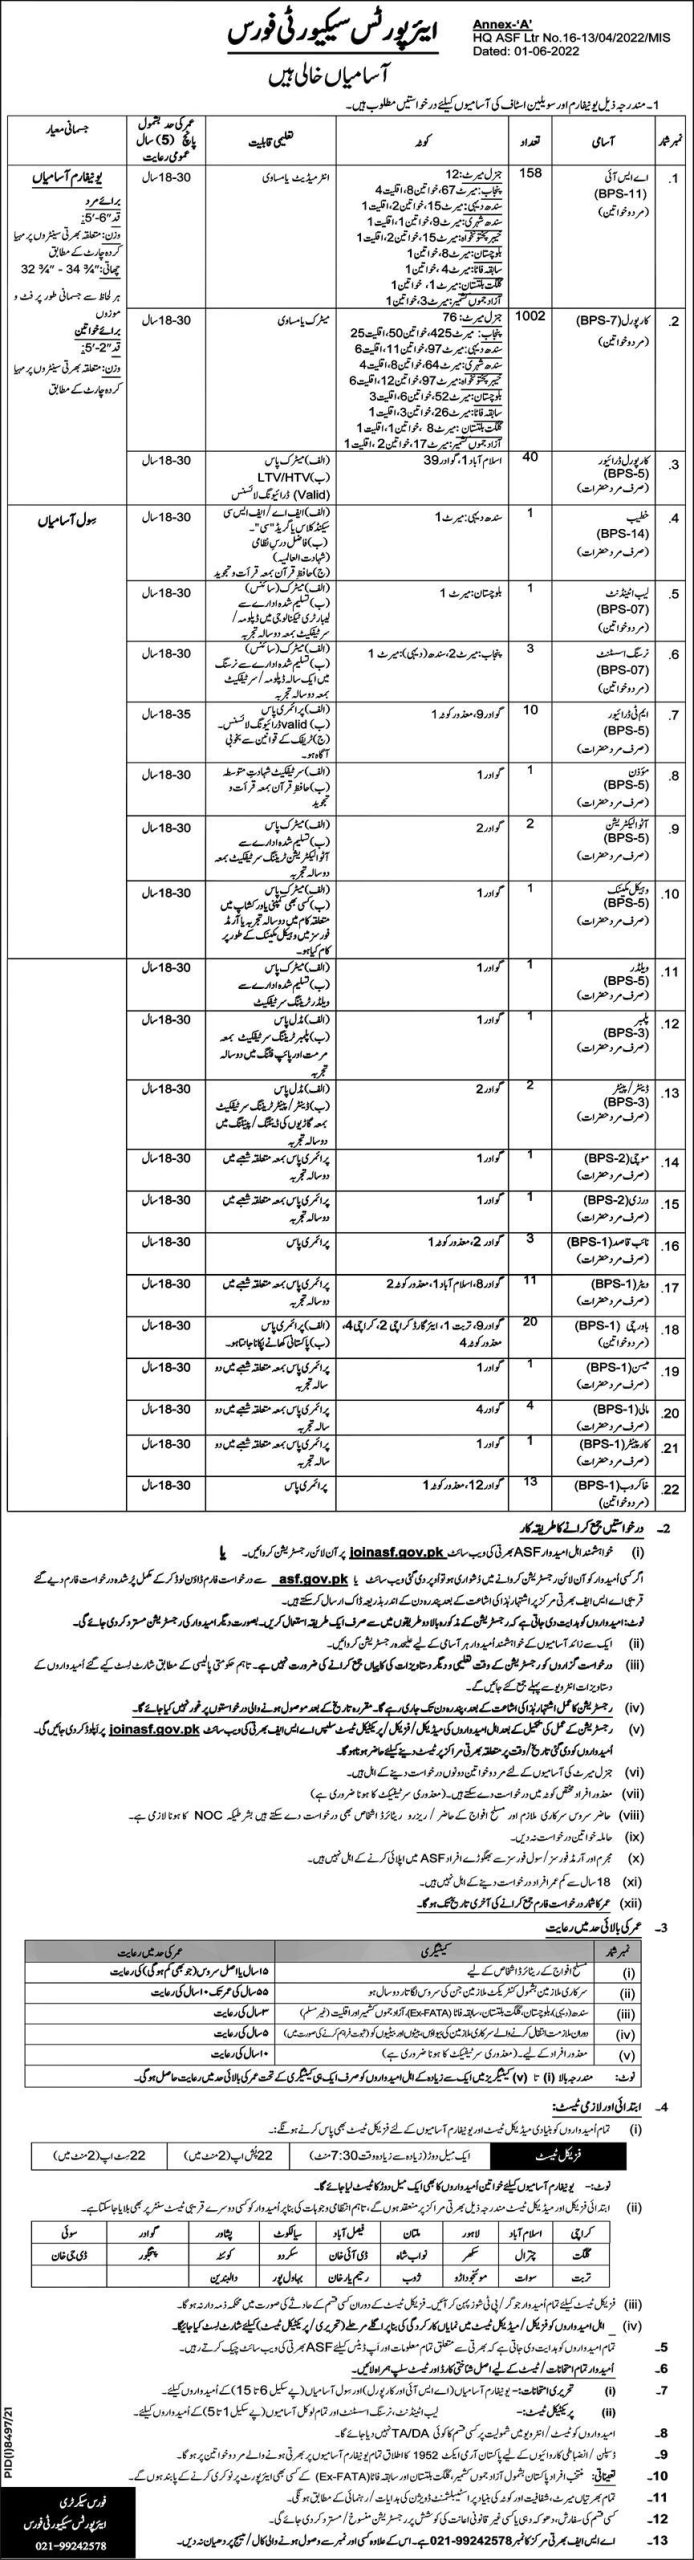 ASF Jobs 2022 Advertisement | Official Website www.joinasf.gov.pk  Intrigued Pakistani Nationals who are youthful, gifted, fiery, and looking for ASF Jobs 2022 Advertisement | Official Website www.joinasf.gov.pk - Airport Security Force Jobs 2022 OR ASF Online Apply Form ought to peruse this post.  Here, we portray total data in regards to Job Descriptions, Vacancies List, Eligibility Criteria Requirements, and Online Application Procedure.  Airport Security Force - ASF Jobs Latest  Posted on:	6th June 2022  Location:	Pakistan  Education:	Intermediate, Matric, Middle, Primary  Last Date:	June 20, 2022  Vacancies:	1250+  Company:	Airport Security Force - ASF  Address:	Force Secretary, Airport Security Force, Rawalpindi  Follow	 Linkedin Page  ASF safeguards the Civil Aviation Industry against unlawful obstructions, embraces counter-psychological warfare measures, forestalls wrongdoing, and keeps up with the rule of law inside the restrictions of air terminals in Pakistan.  This Force was laid out in 1976. Right now, it has in excess of 9 thousand workers. It is selecting more representatives and giving profession open doors to youthful, fiery, and dynamic Pakistani understudies according to its necessities.  The Airport Security Force has reported today second Recruitment Notice in 2022. This Recruitment Notice 2022 of ASF Careers is likewise accessible on the authority site of the Airport Security Force www.asf.gov.pk.  Www.asf.gov.pk Jobs 2022 Online Apply is opening today for the new 1250+ empty places of Uniform and Non-Uniform Staff. Up-and-comers who need to turn into a piece of this power should apply online for any of the beneath depicted positions.  Occupations in Airport Security Force are opening for Assistant Sub Inspector ASI, Corporal, Khateeb, Corporal Driver, Nursing Assistant, MT Driver, Moazzan, Auto Electrician, Vehicle Mechanic, Welder, Plumber, Tailor, Naib Qasid, Waiter, Cook, Mason, Mali, Sweeper, and Carpenter.  These Forces Jobs are opening for Primary, Middle, Matriculation, and Intermediate capability holders. Competitors who are wanted for Corporal or ASI Jobs should fill the Physical Requirements too.  Up-and-comers across Pakistan are qualified to Join ASF. Both Male/Female candidates can go after Uniform and Non-Uniform jobs, yet they ought to satisfy the qualification needs appropriately.  Quantities for every region like Khyber Pakhtunkhwa, Balochistan, Gilgit Baltistan, AJK, Punjab, Sindh, and FATA are recorded in the promotion with the quantity of positions opening here.  Intrigued candidates who wish to go after Uniform Jobs like Assistant Sub-Inspector, Corporal, and Corporal Driver should likewise meet the actual necessities.  Age Limit: 18 to 30 Years  Chest: 32-3/4 to 34-3/4 Inches For Male Only  Level: 5 Feet 6 Inches for Male  Level: 5 Feet 2 Inches - Females  Vacant Positions:  Assistant Sub Inspector ASI  Auto Electrician  Carpenter  Cook  Corporal  Corporal Driver  Khateeb  Mali  Mason  Moazzan  MT Driver  Naib Qasid  Nursing Assistant  Plumber  Sweeper  Tailor  Vehicle Mechanic  Waiter  Welder  ASF Recruitment and Selection Centers for Medical and Physical Tests are opened in Karachi, Islamabad, Lahore, Multan, Faisalabad, Sialkot, Peshawar, Gwadar, Sui, Gilgit, Chitral, Sukkur, Nawabshah, Dera Ismail Khan, Skardu, Quetta, Panjgur, Dera Ghazi Khan, Turbat, Swat, Zhob, Rahim Yar Khan, and Bahawalpur.  Related Links:  Enemies of Narcotics Force ANF Jobs 2022 Online Form  Enlist in Pakistan Army as Medical Cadet Jobs 2022  How to Apply?  Wanted and qualified people can open the ASF Job Portal at www.joinasf.gov.pk for accommodation of online applications.  Just Online Registration is satisfactory. Up-and-comers who don't approach the Internet Facility or confronting issue with Online Registration can download the Application Form and submit it to the closest Recruitment Center.  ASF Jobs Advertisements